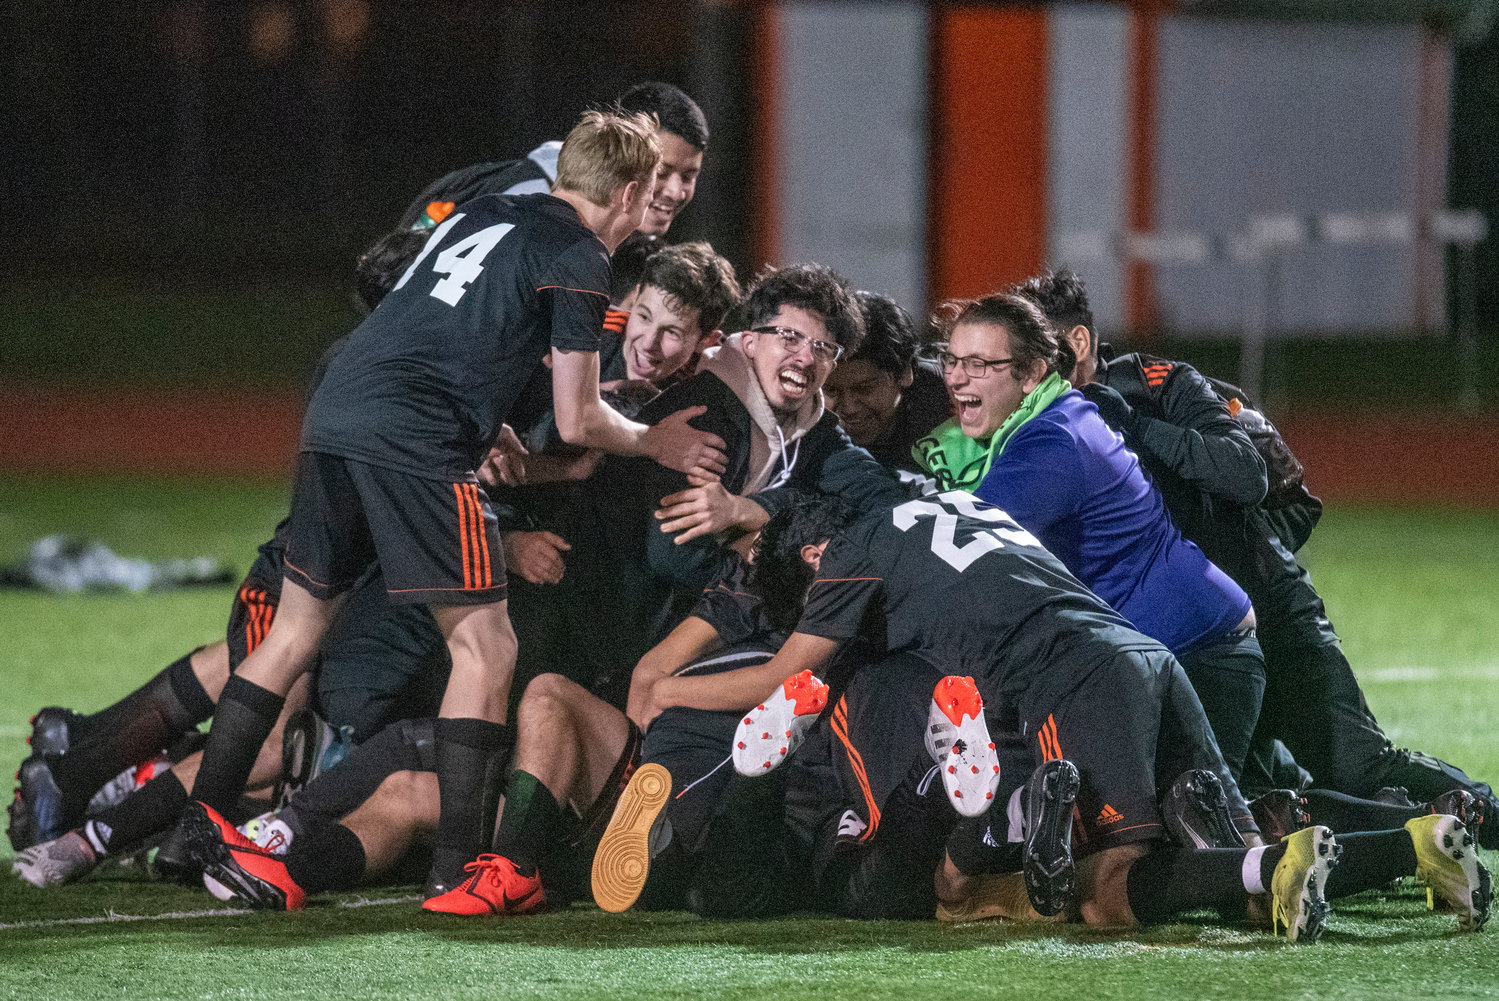 Centralia soccer players pile on Darrell Neuert after Neuert hit the Chronicle Cup-winning PK against W.F. West on April 22.